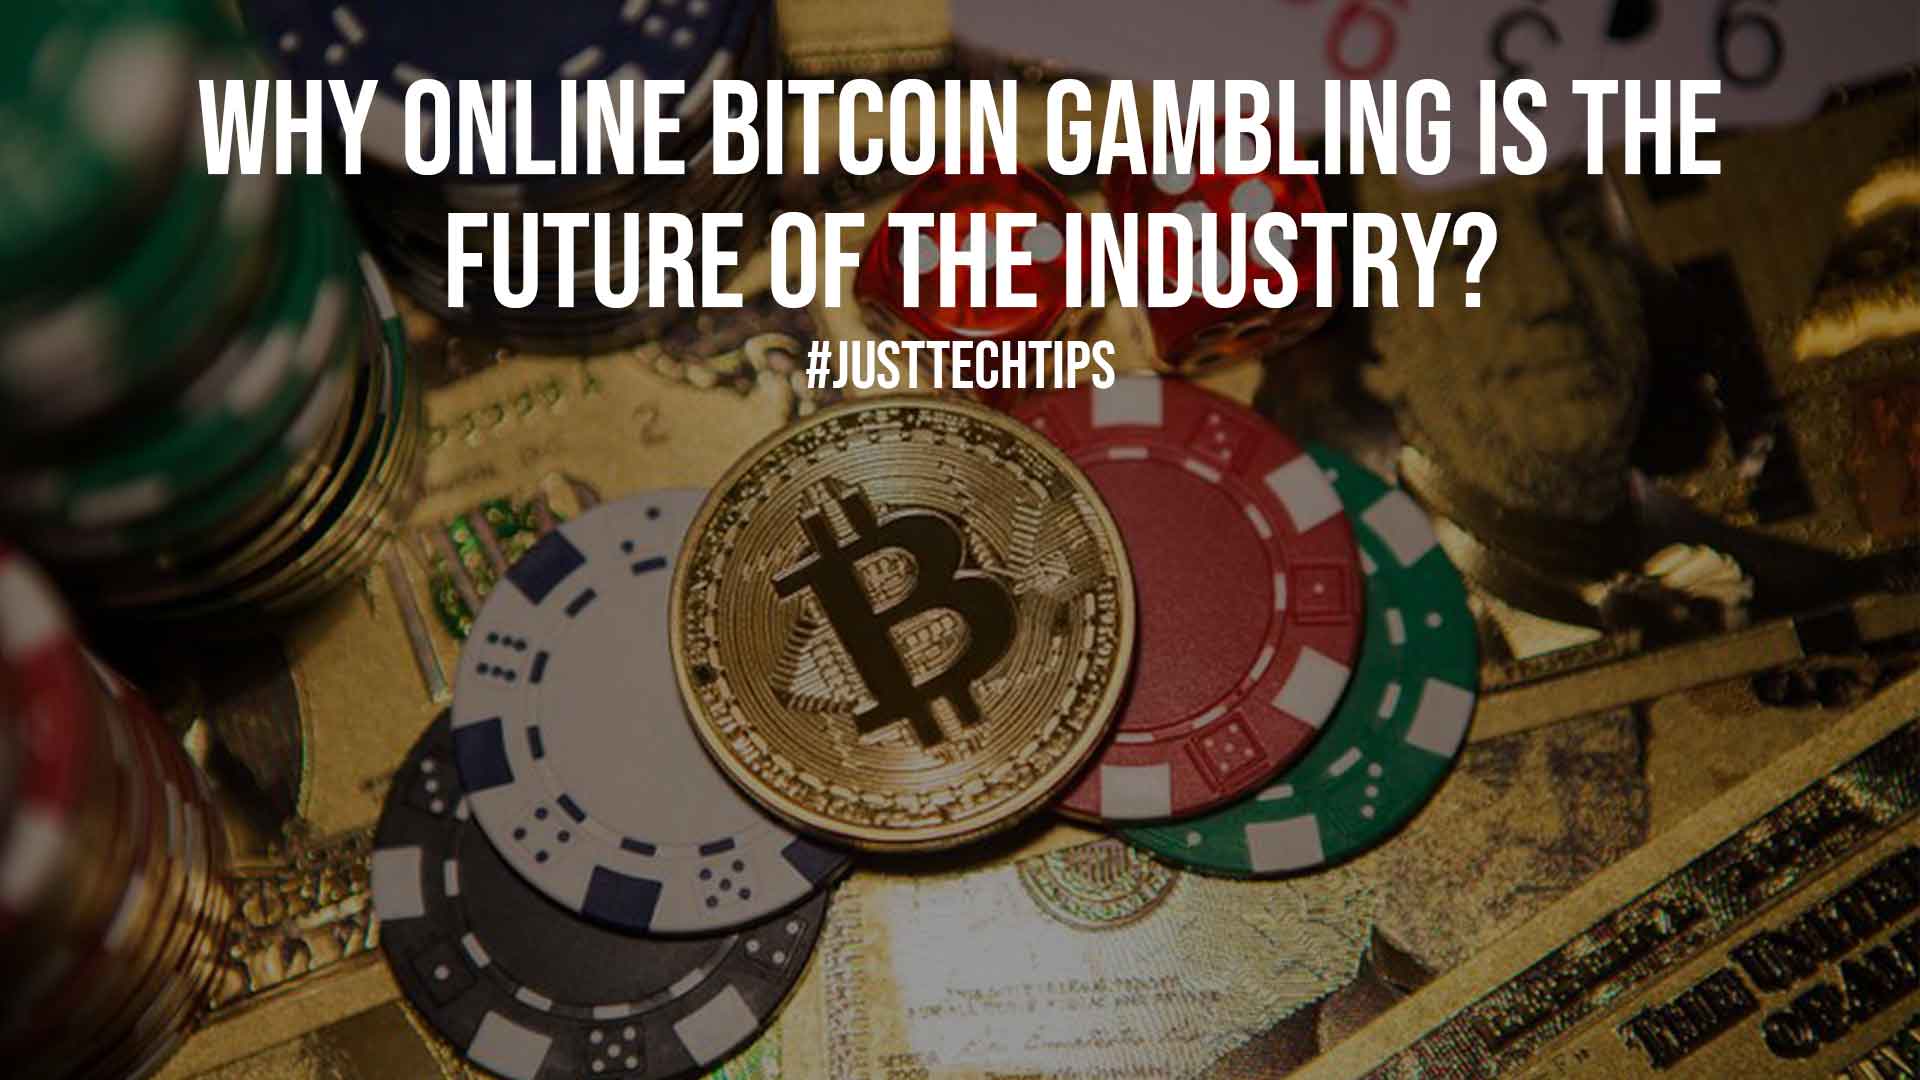 Why Online Bitcoin Gambling is the Future of the Industry